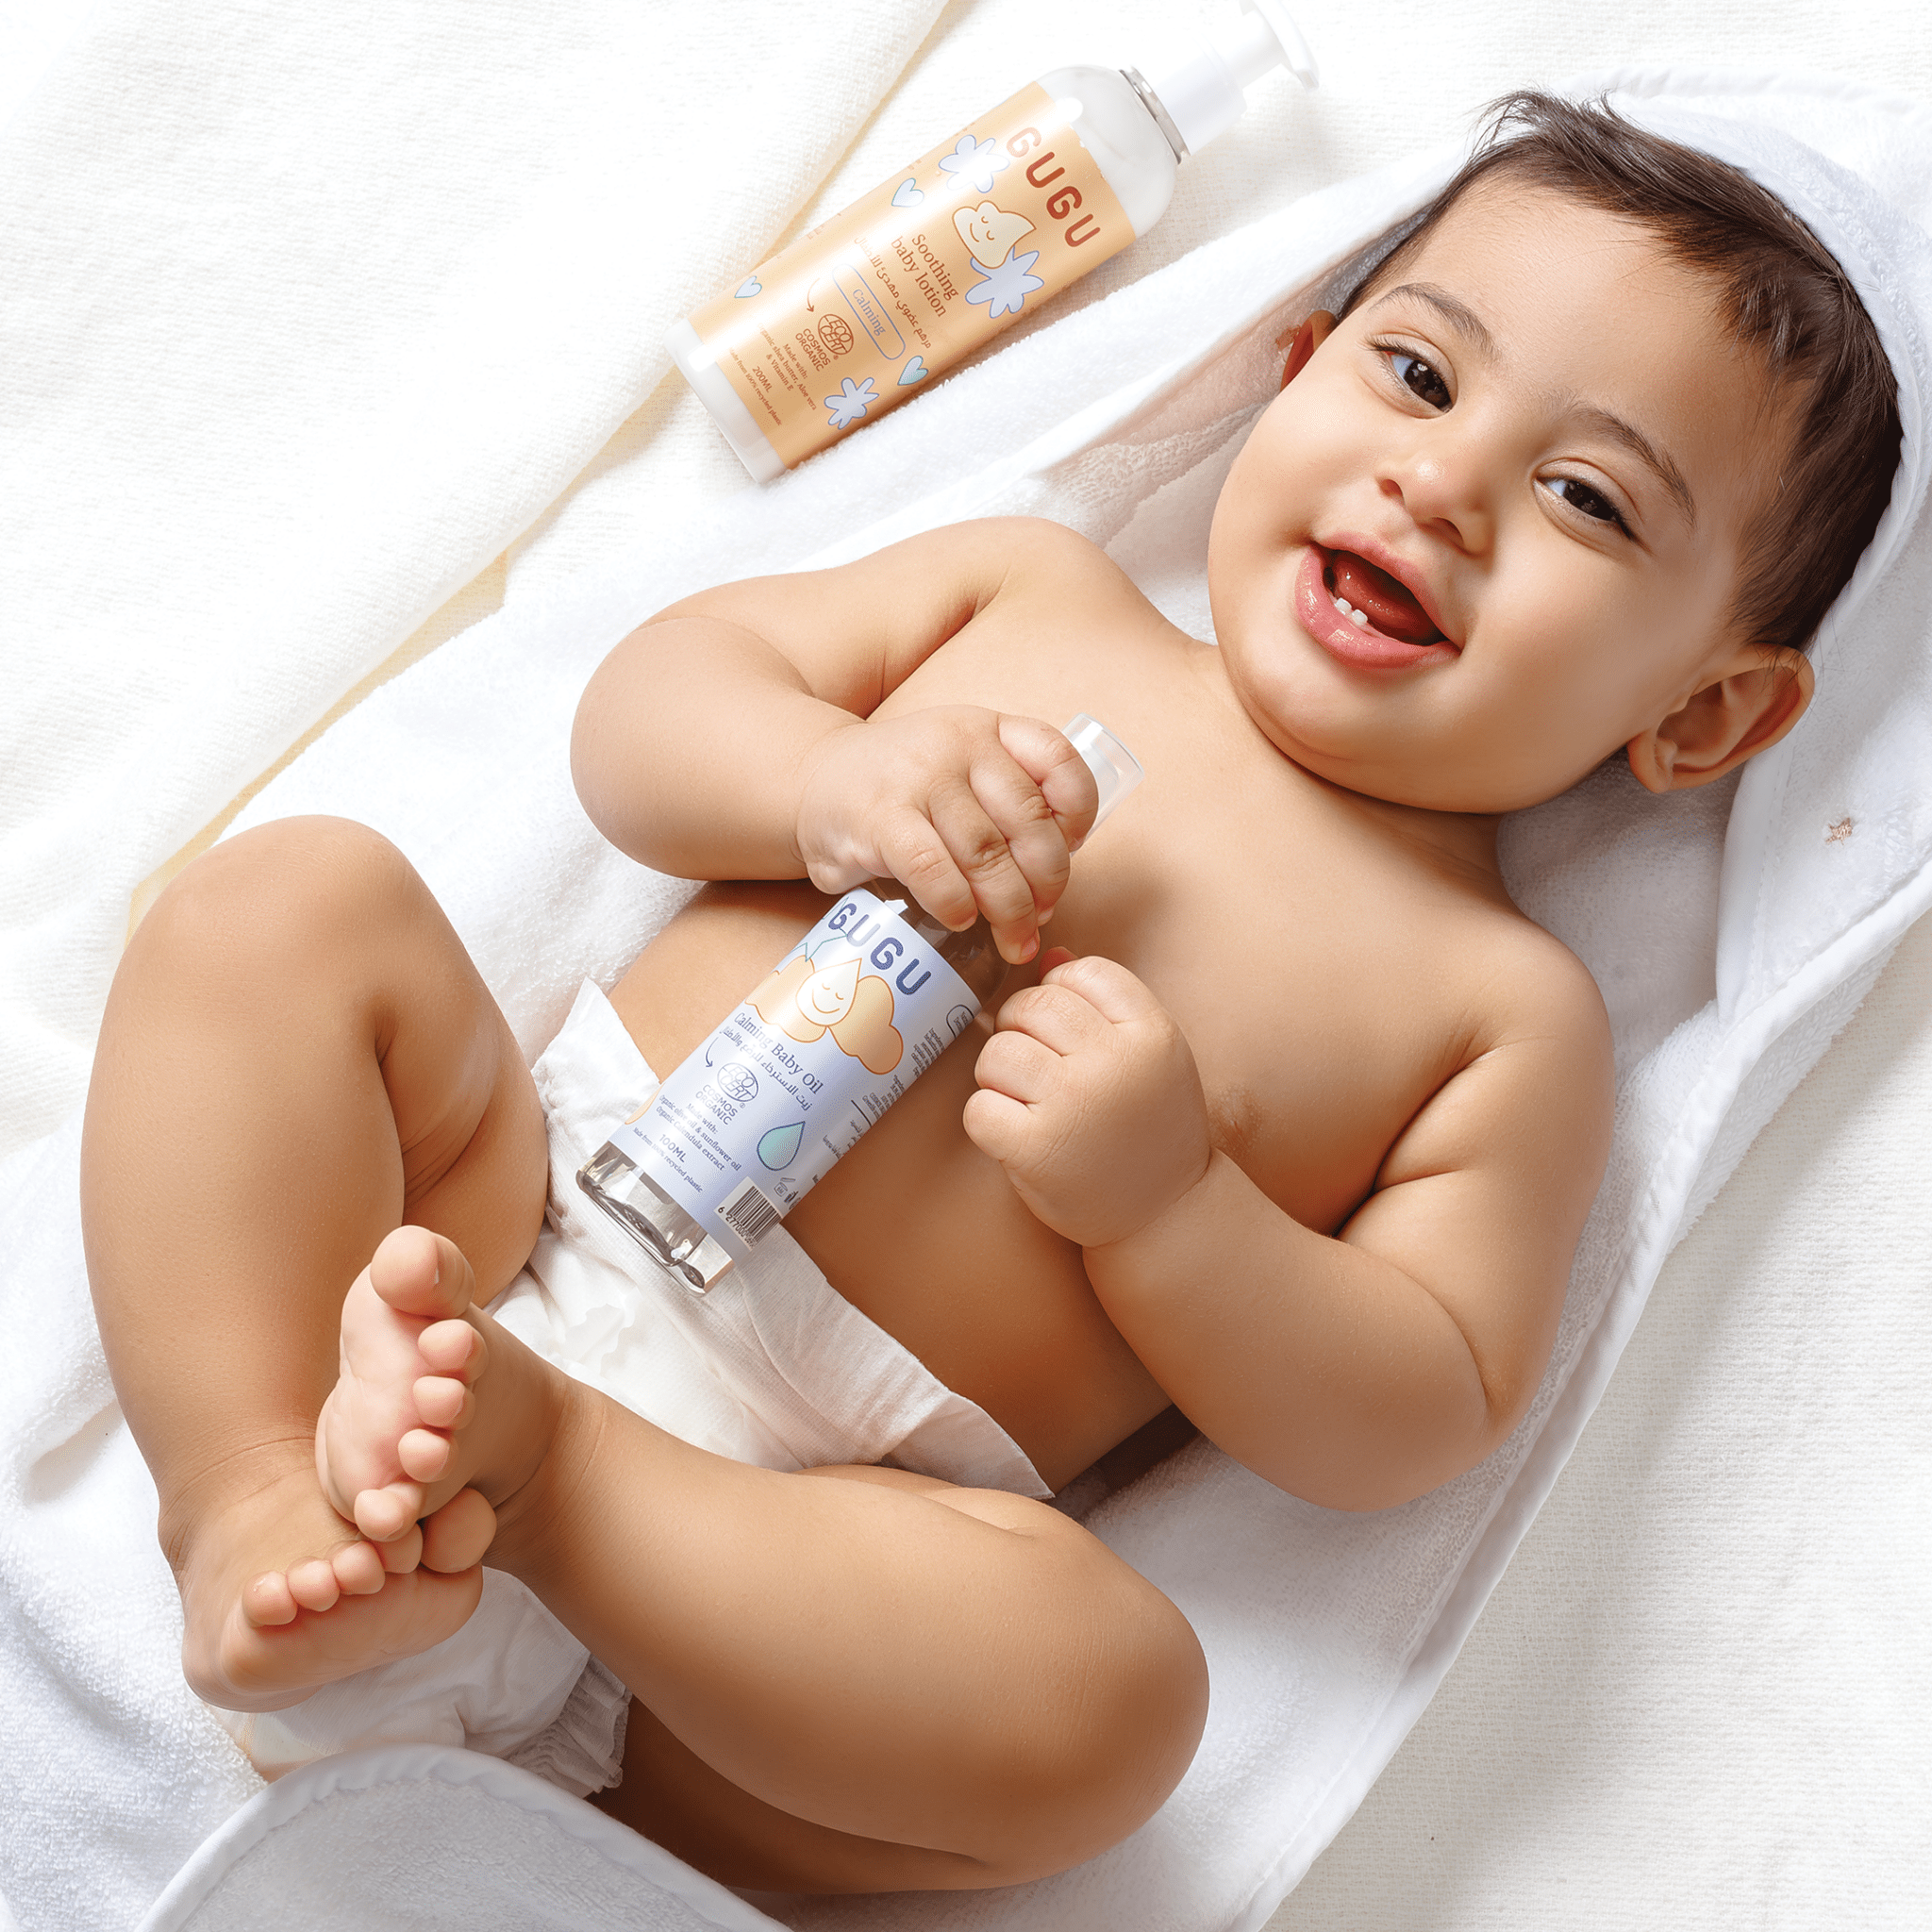 Diaper Rash: Signs, Causes And Prevention - My BumBum